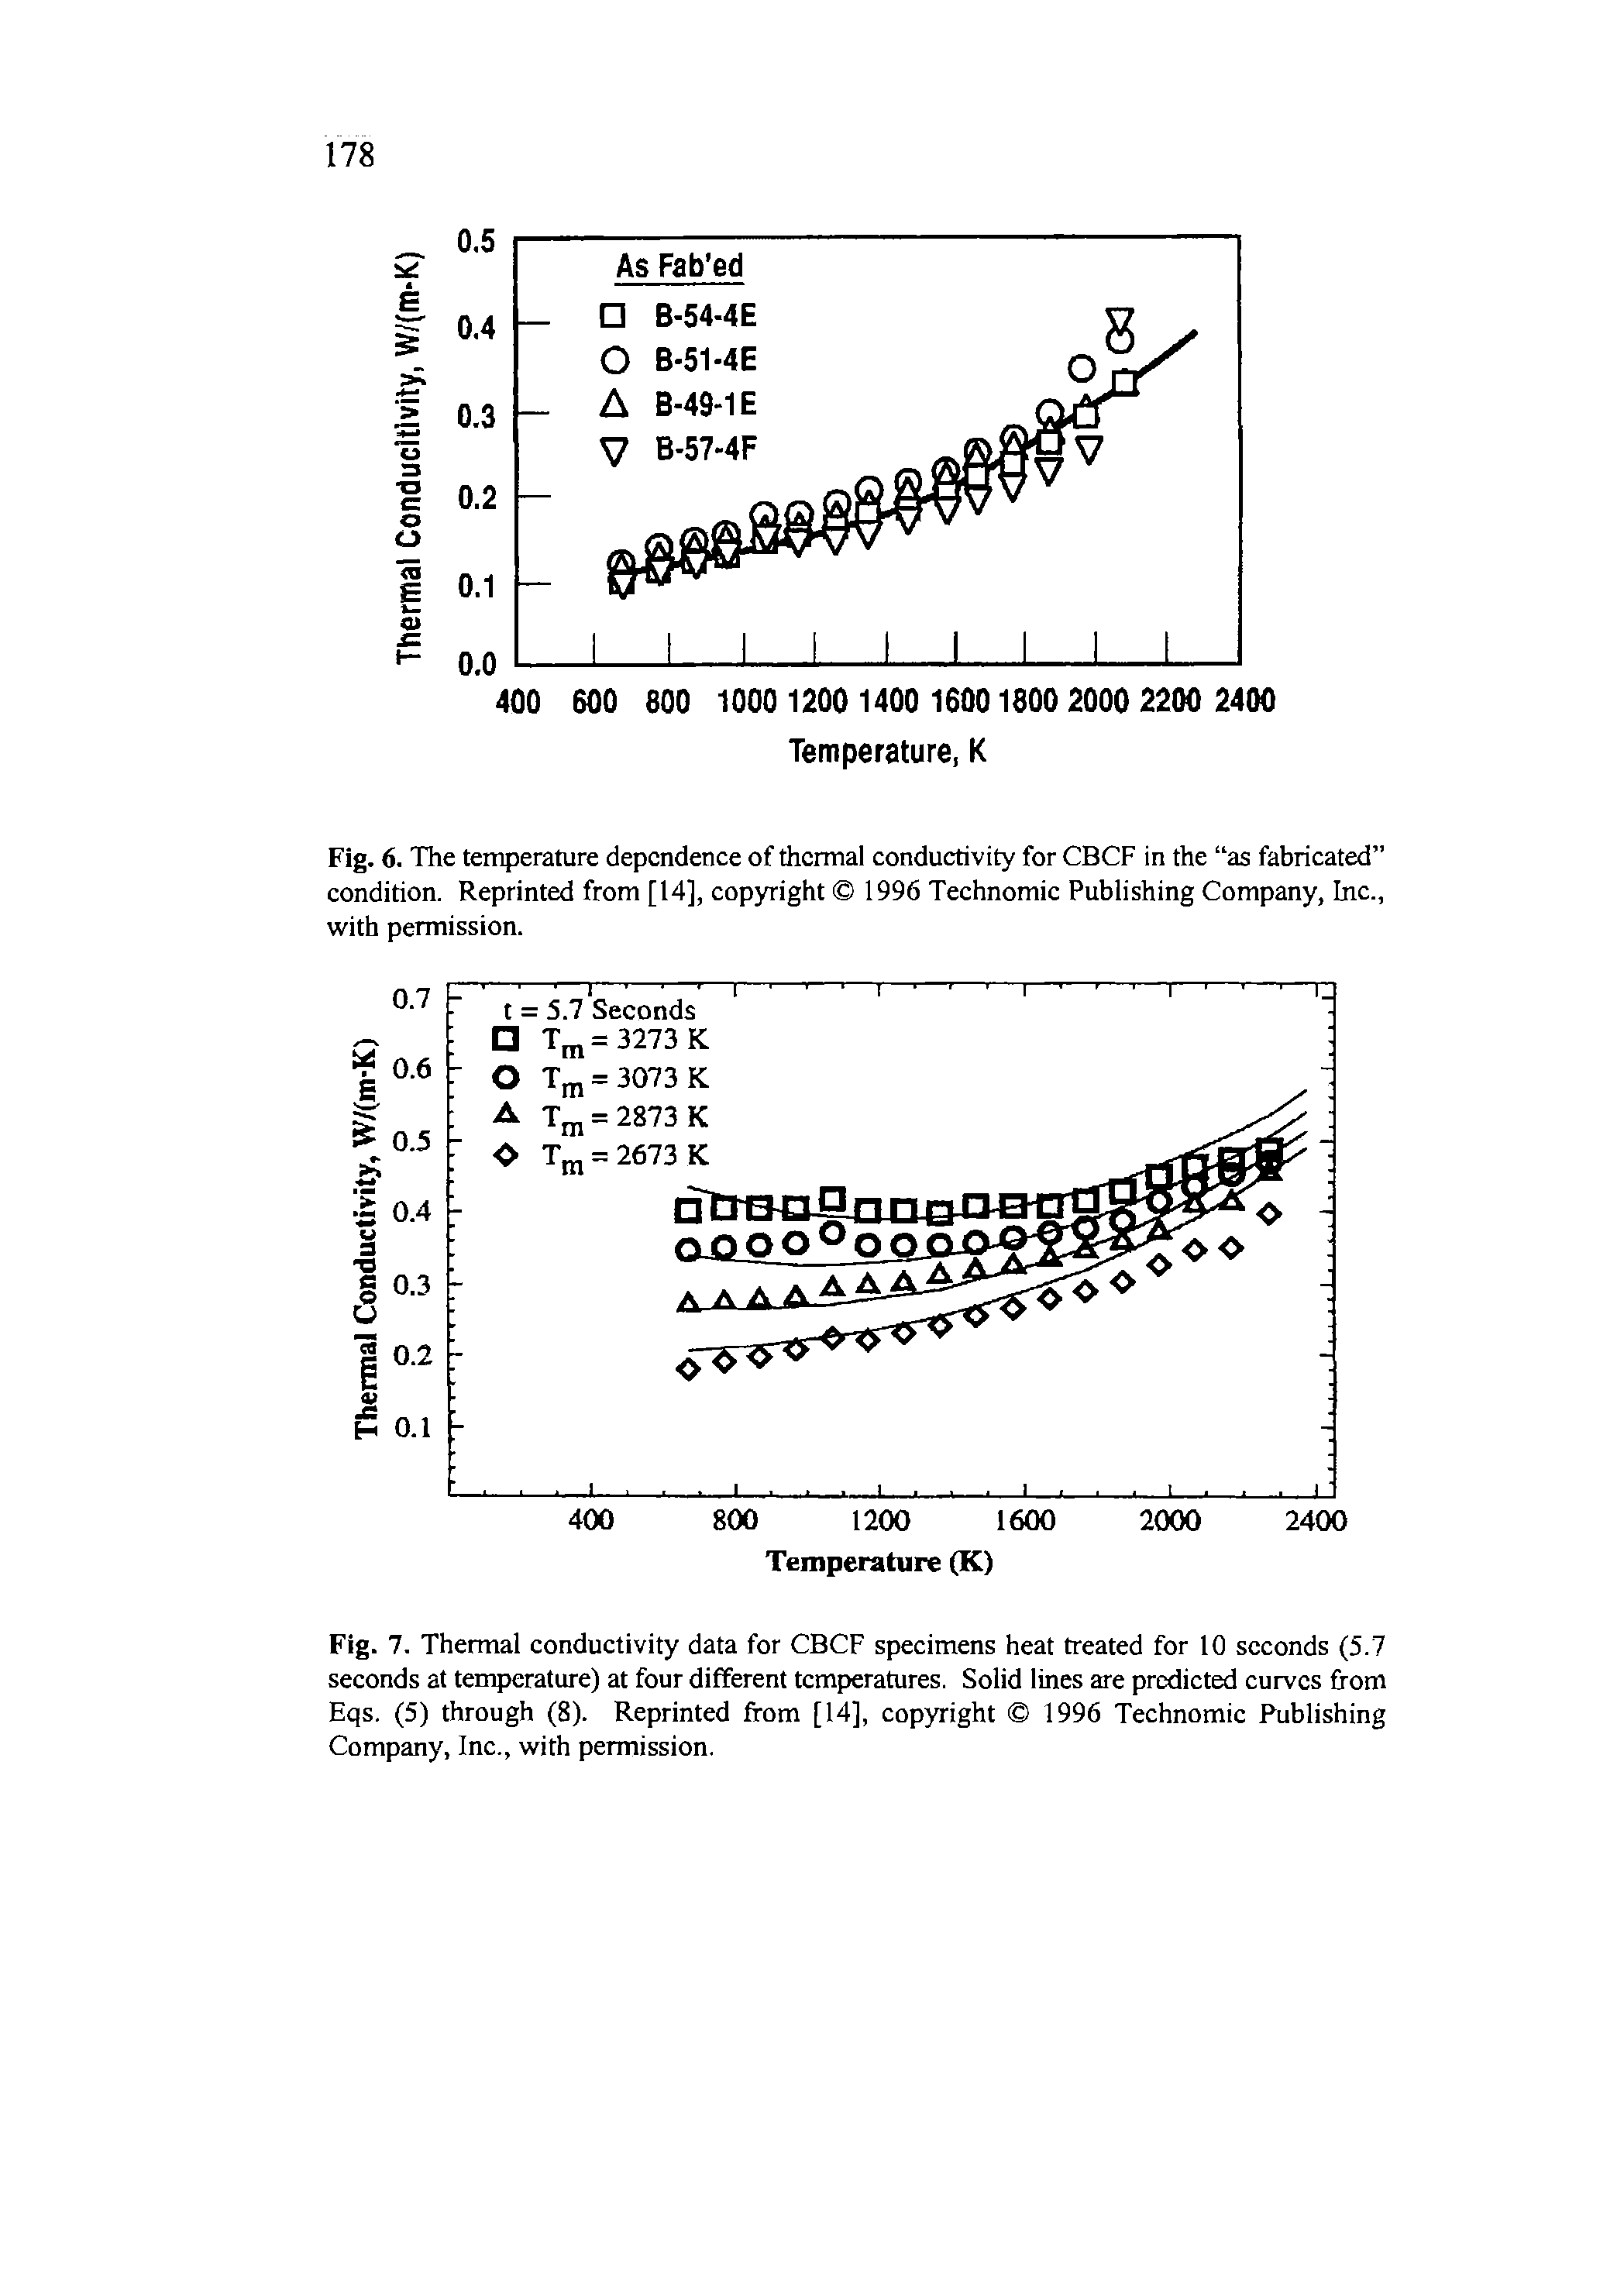 Fig. 7. Thermal conductivity data for CBCF specimens heat treated for 10 seconds (5.7 seconds at temperature) at four different temperatures. Solid lines are predicted curves from Eqs. (5) through (8). Reprinted from [14], copyright 1996 Technomic Publishing Company, Inc., with permission.